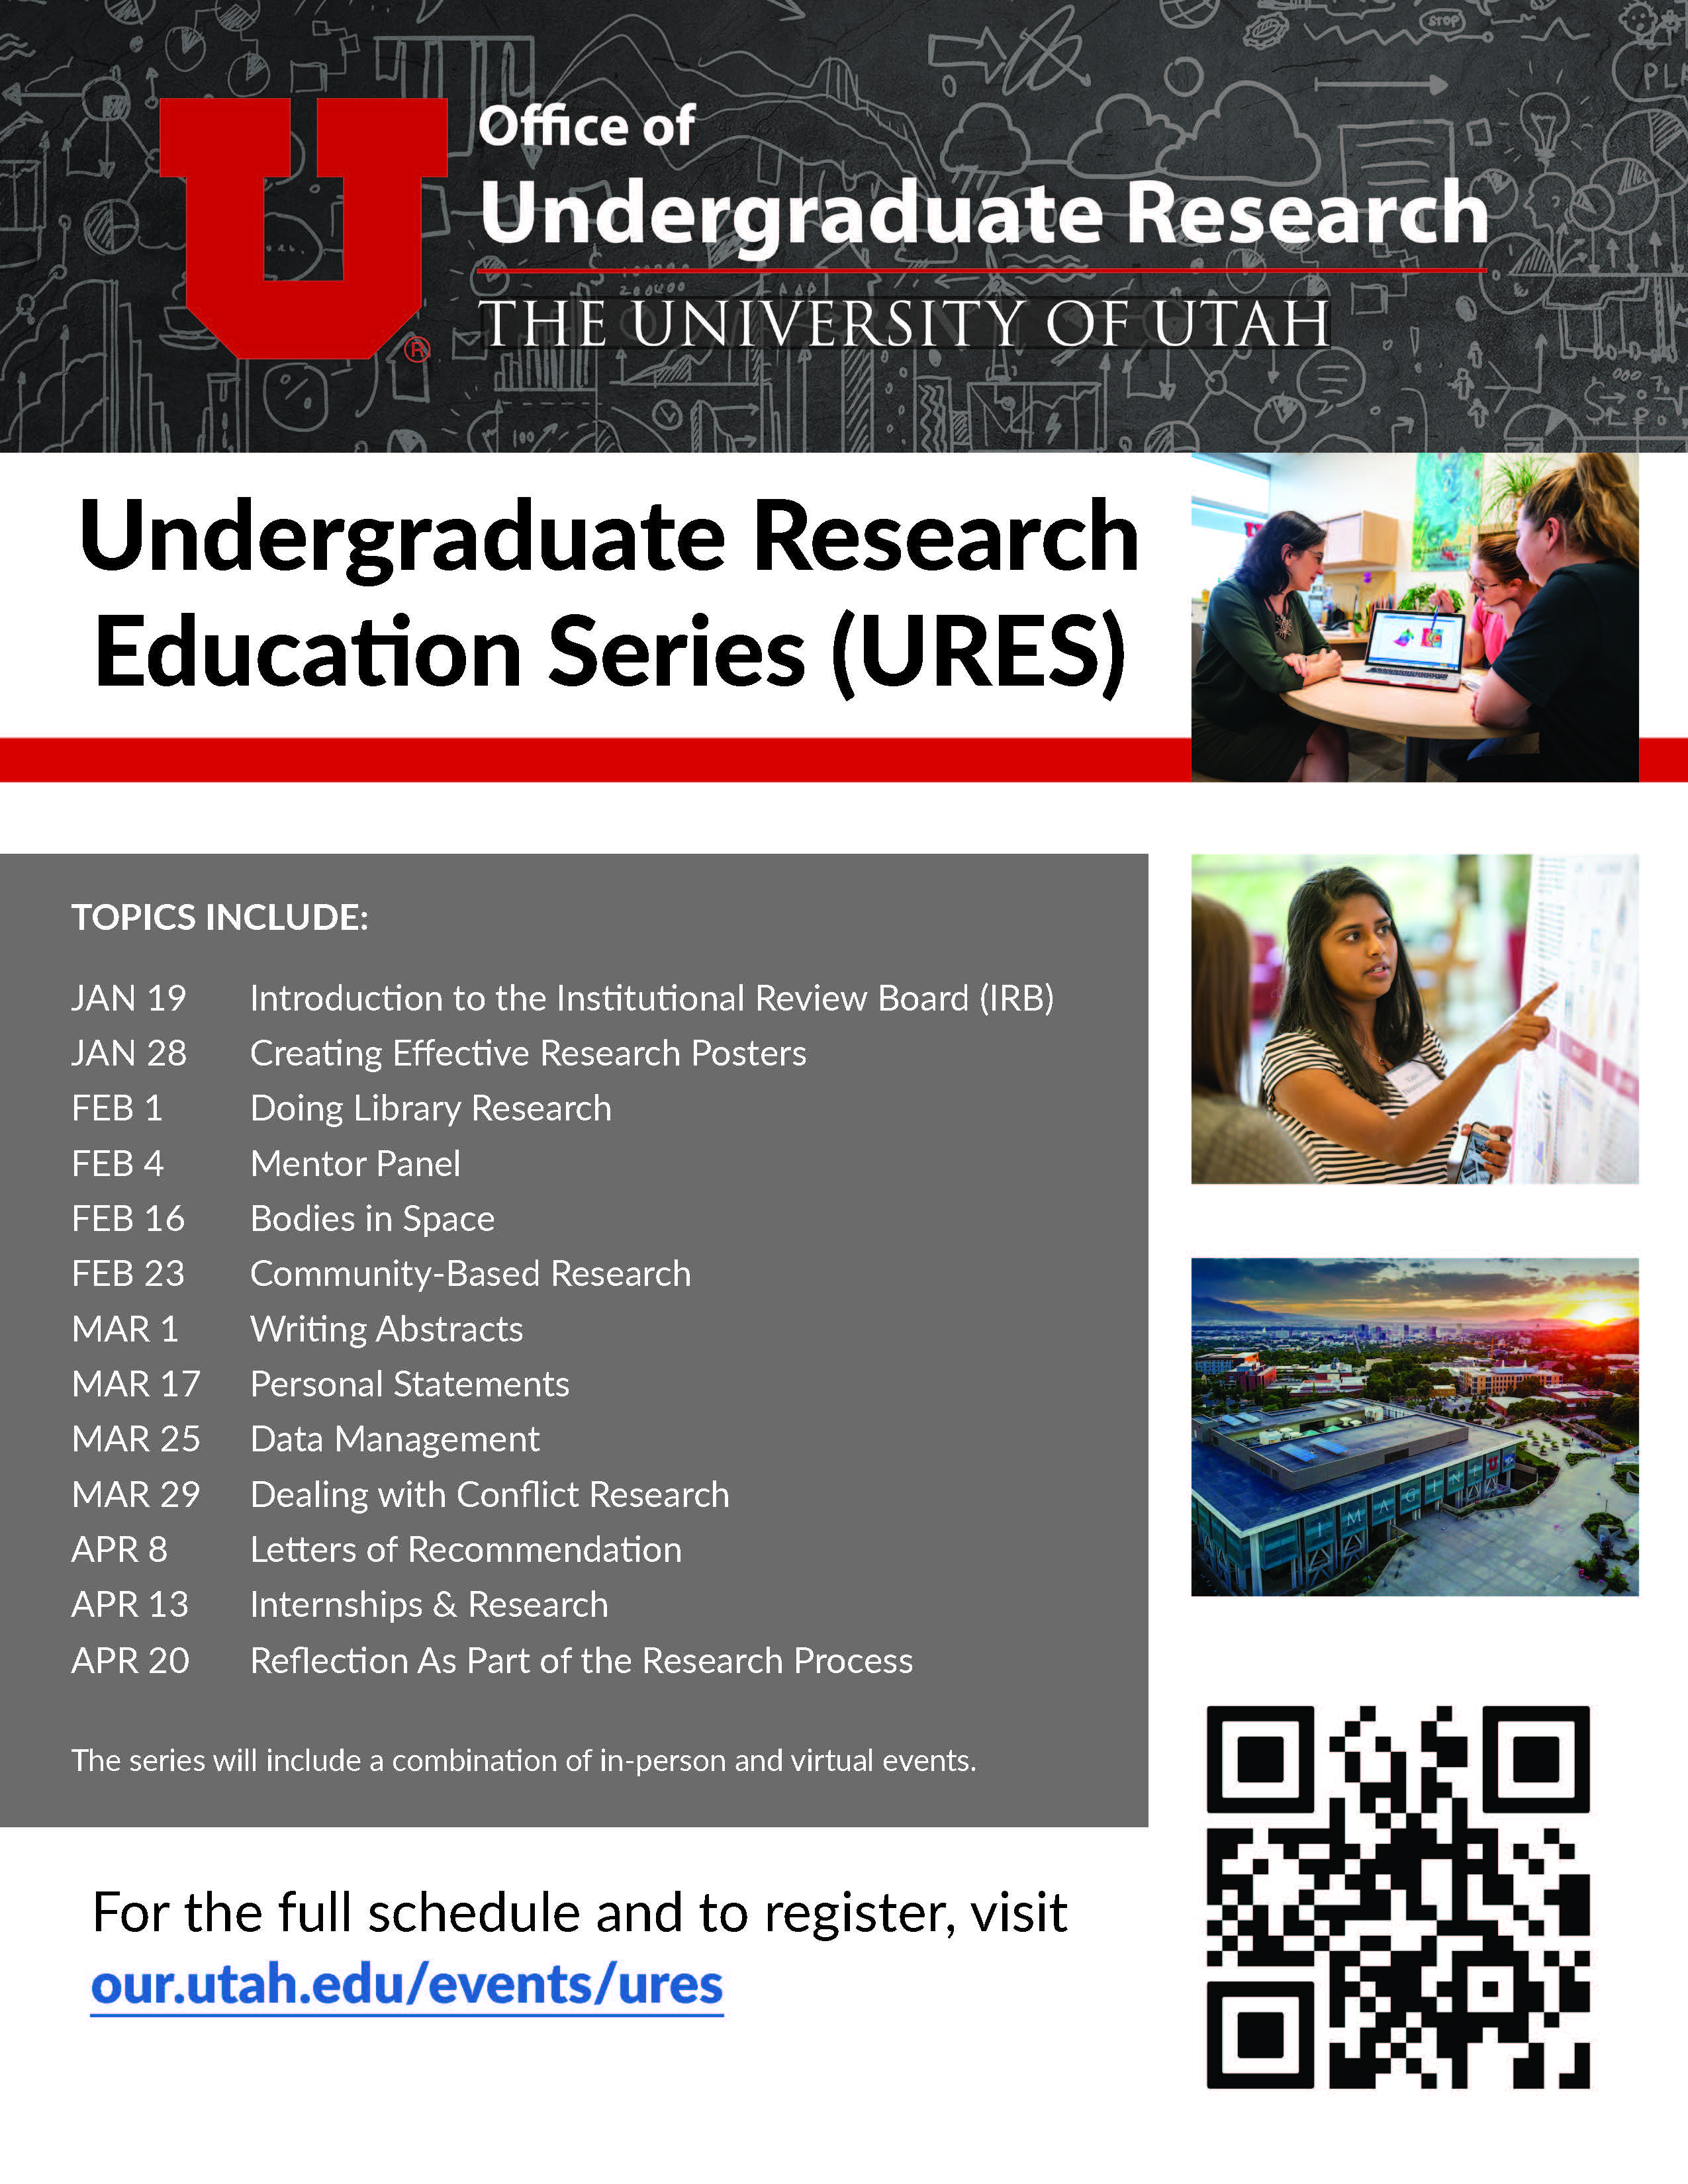 urop research education series